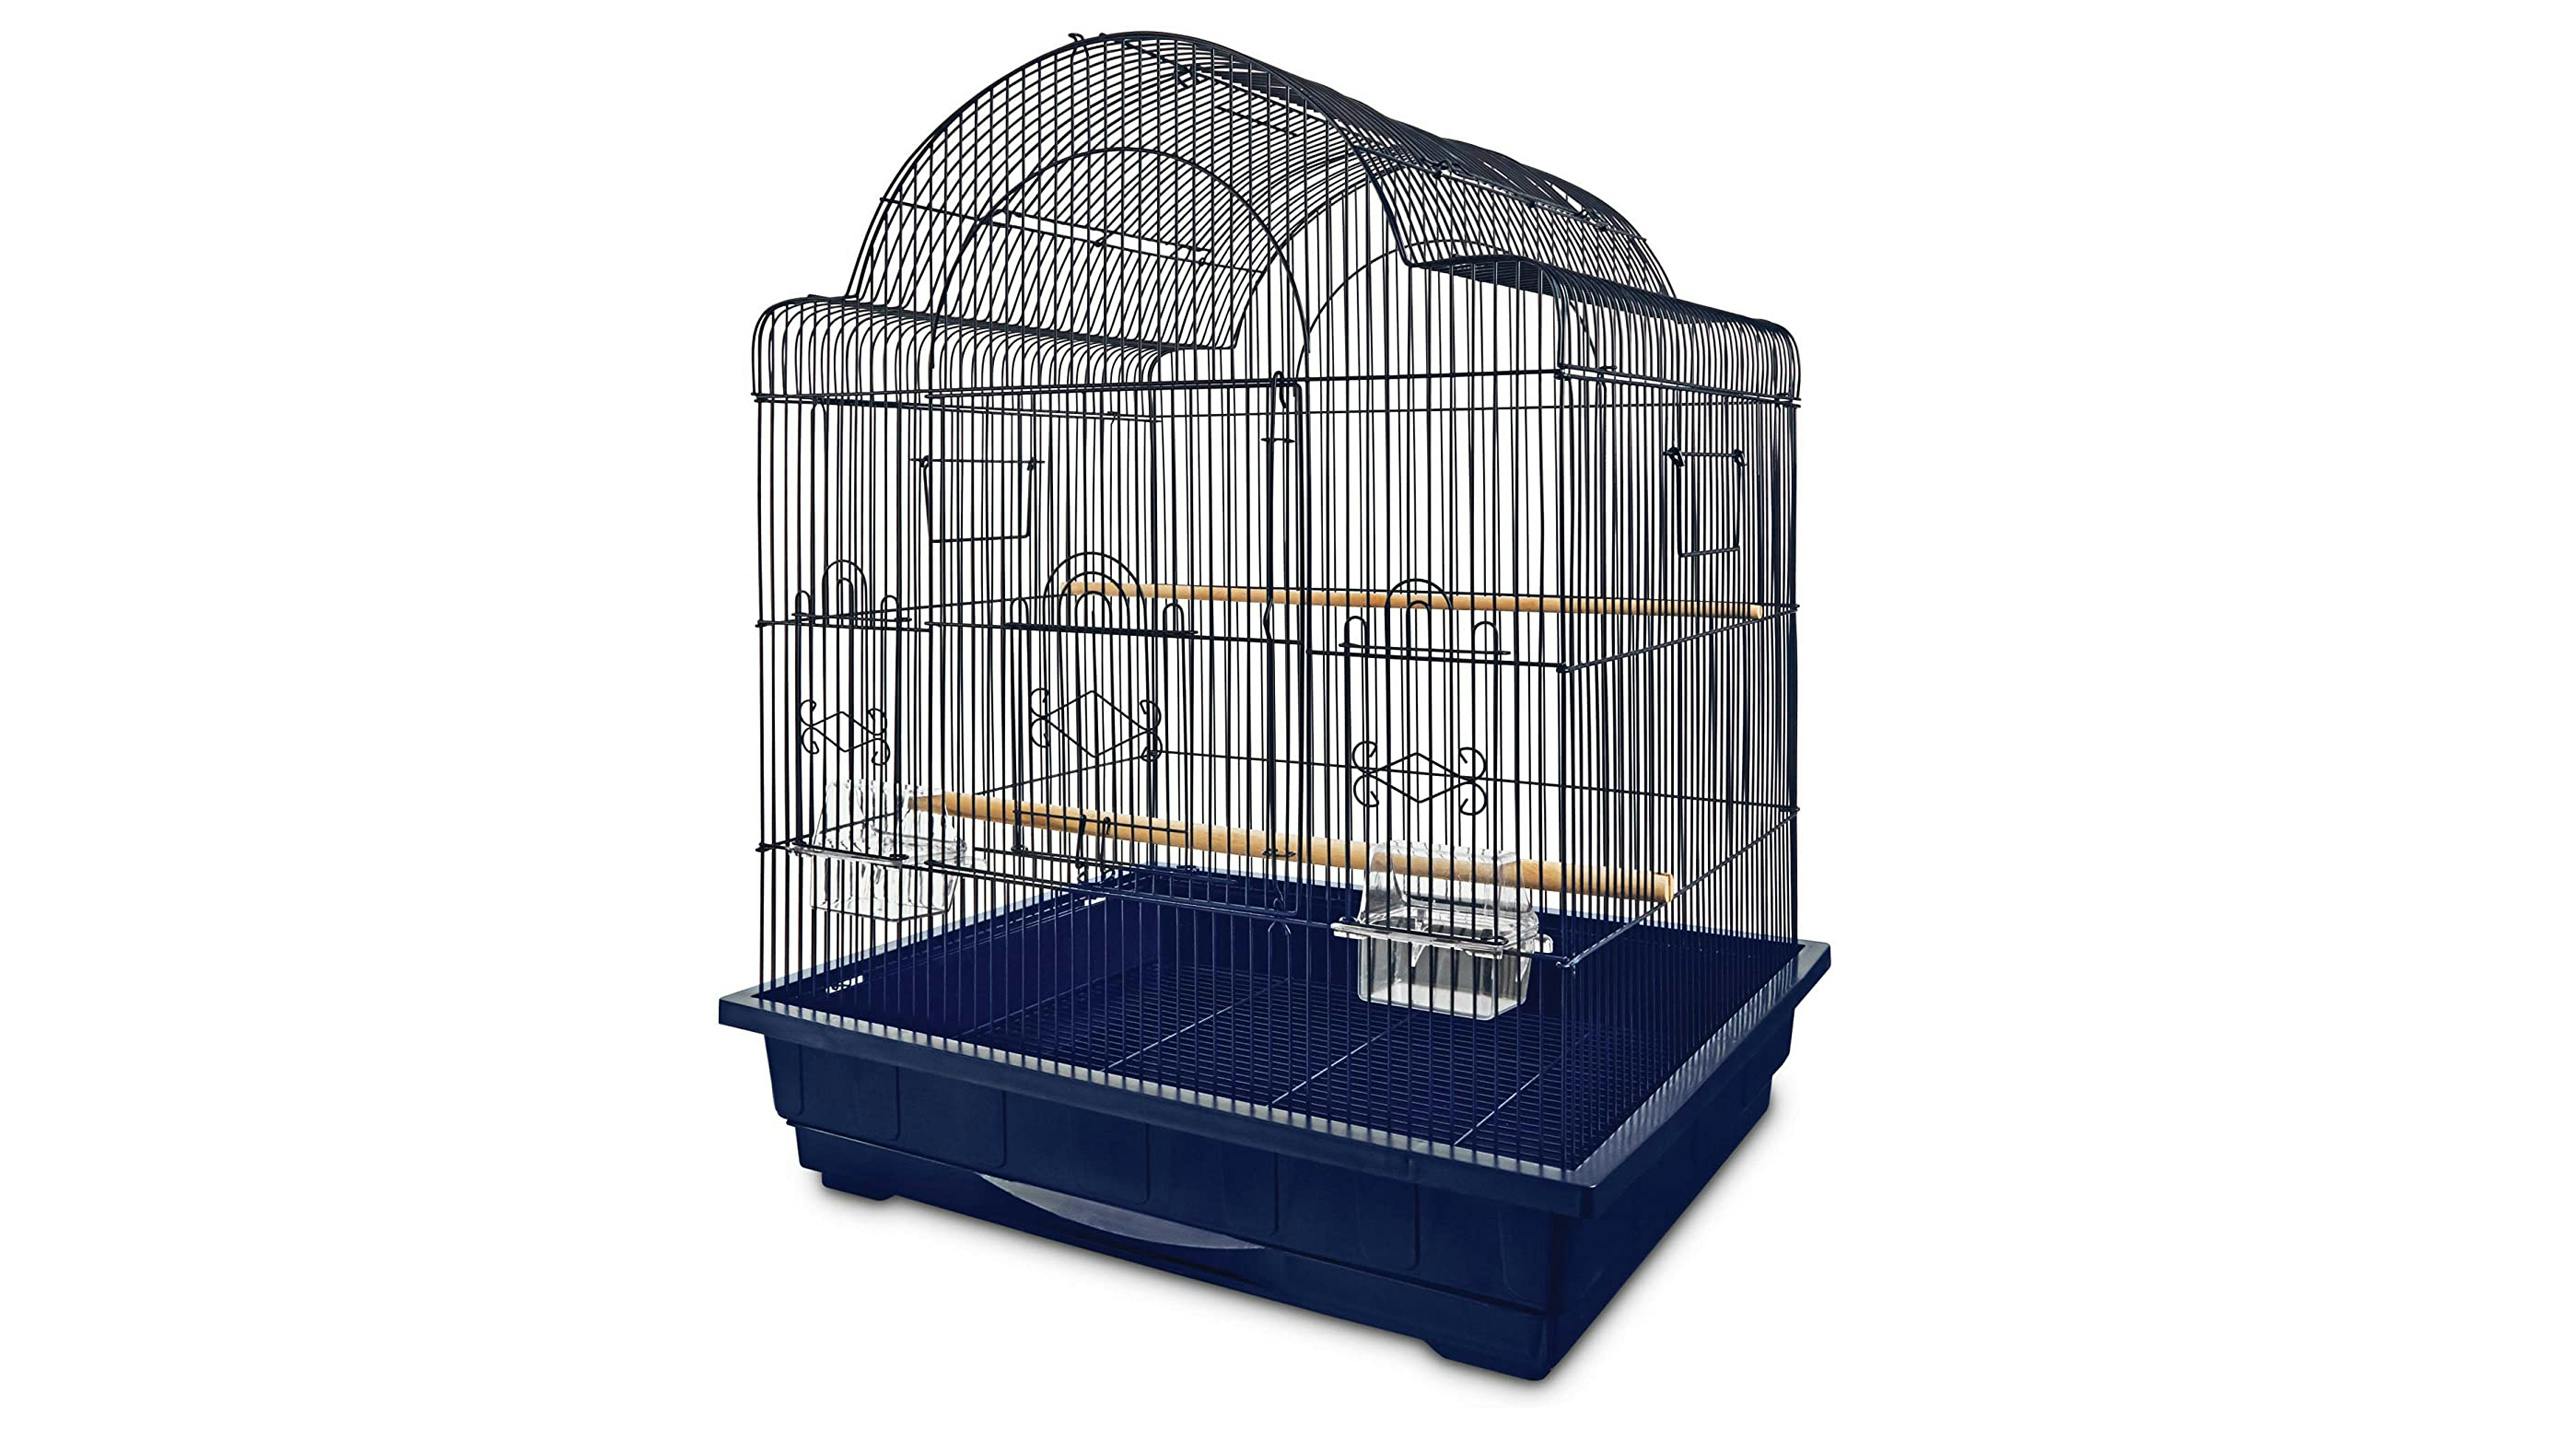 A Petco Open Parrot Cage product image.